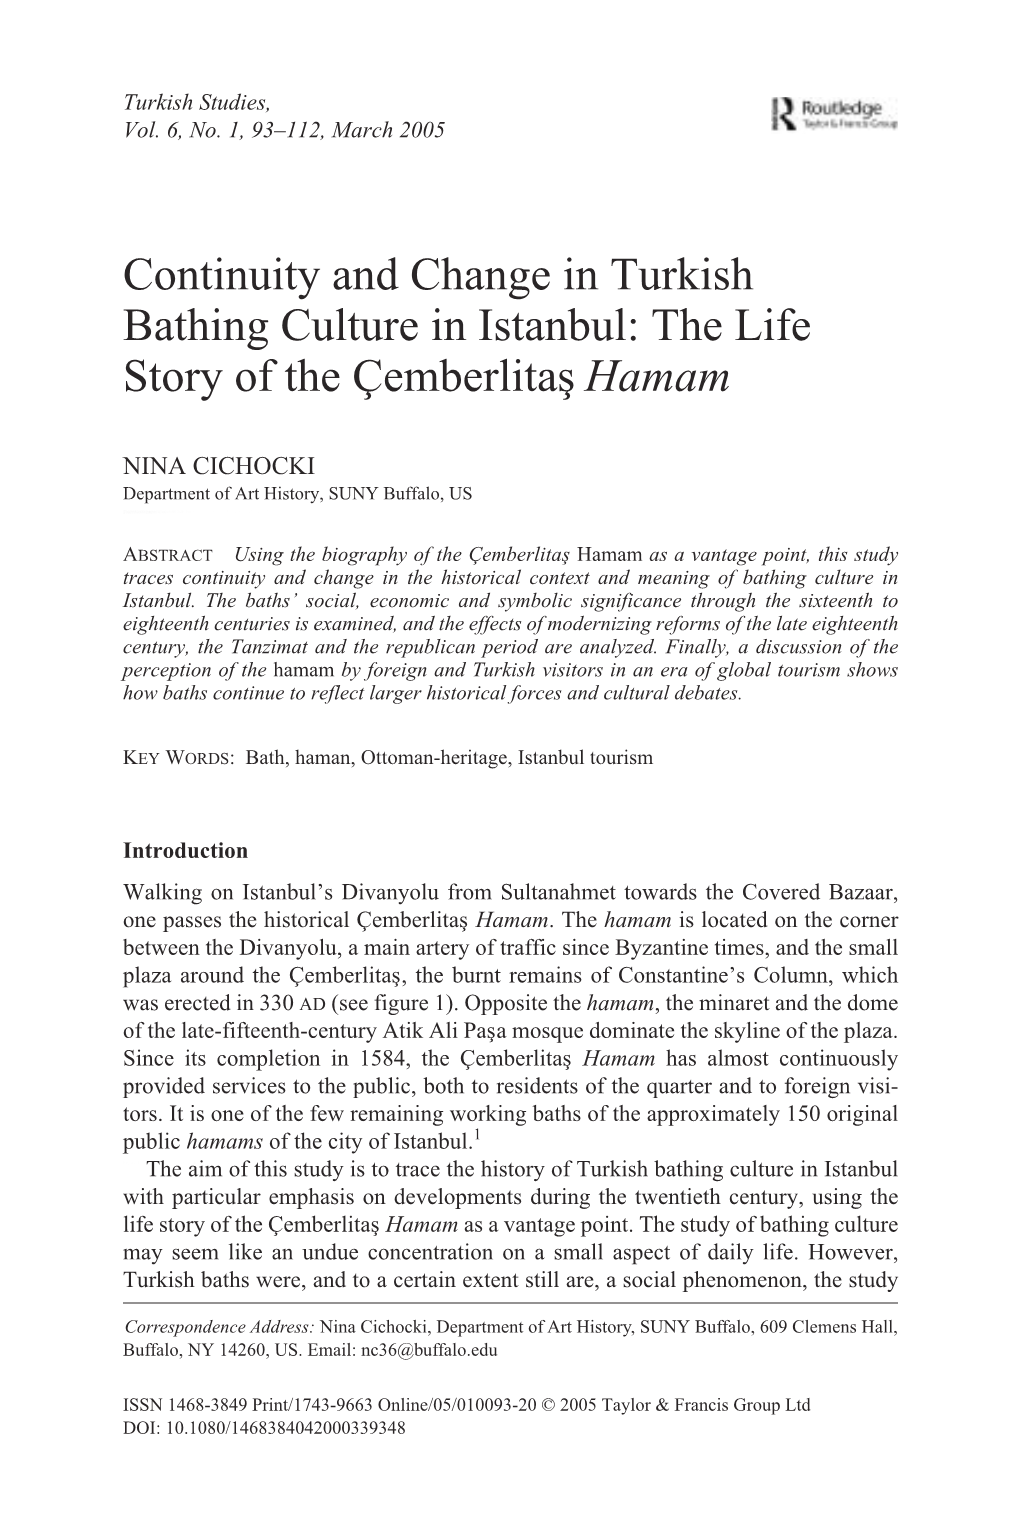 Continuity and Change in Turkish Bathing Culture in Istanbul: the Life